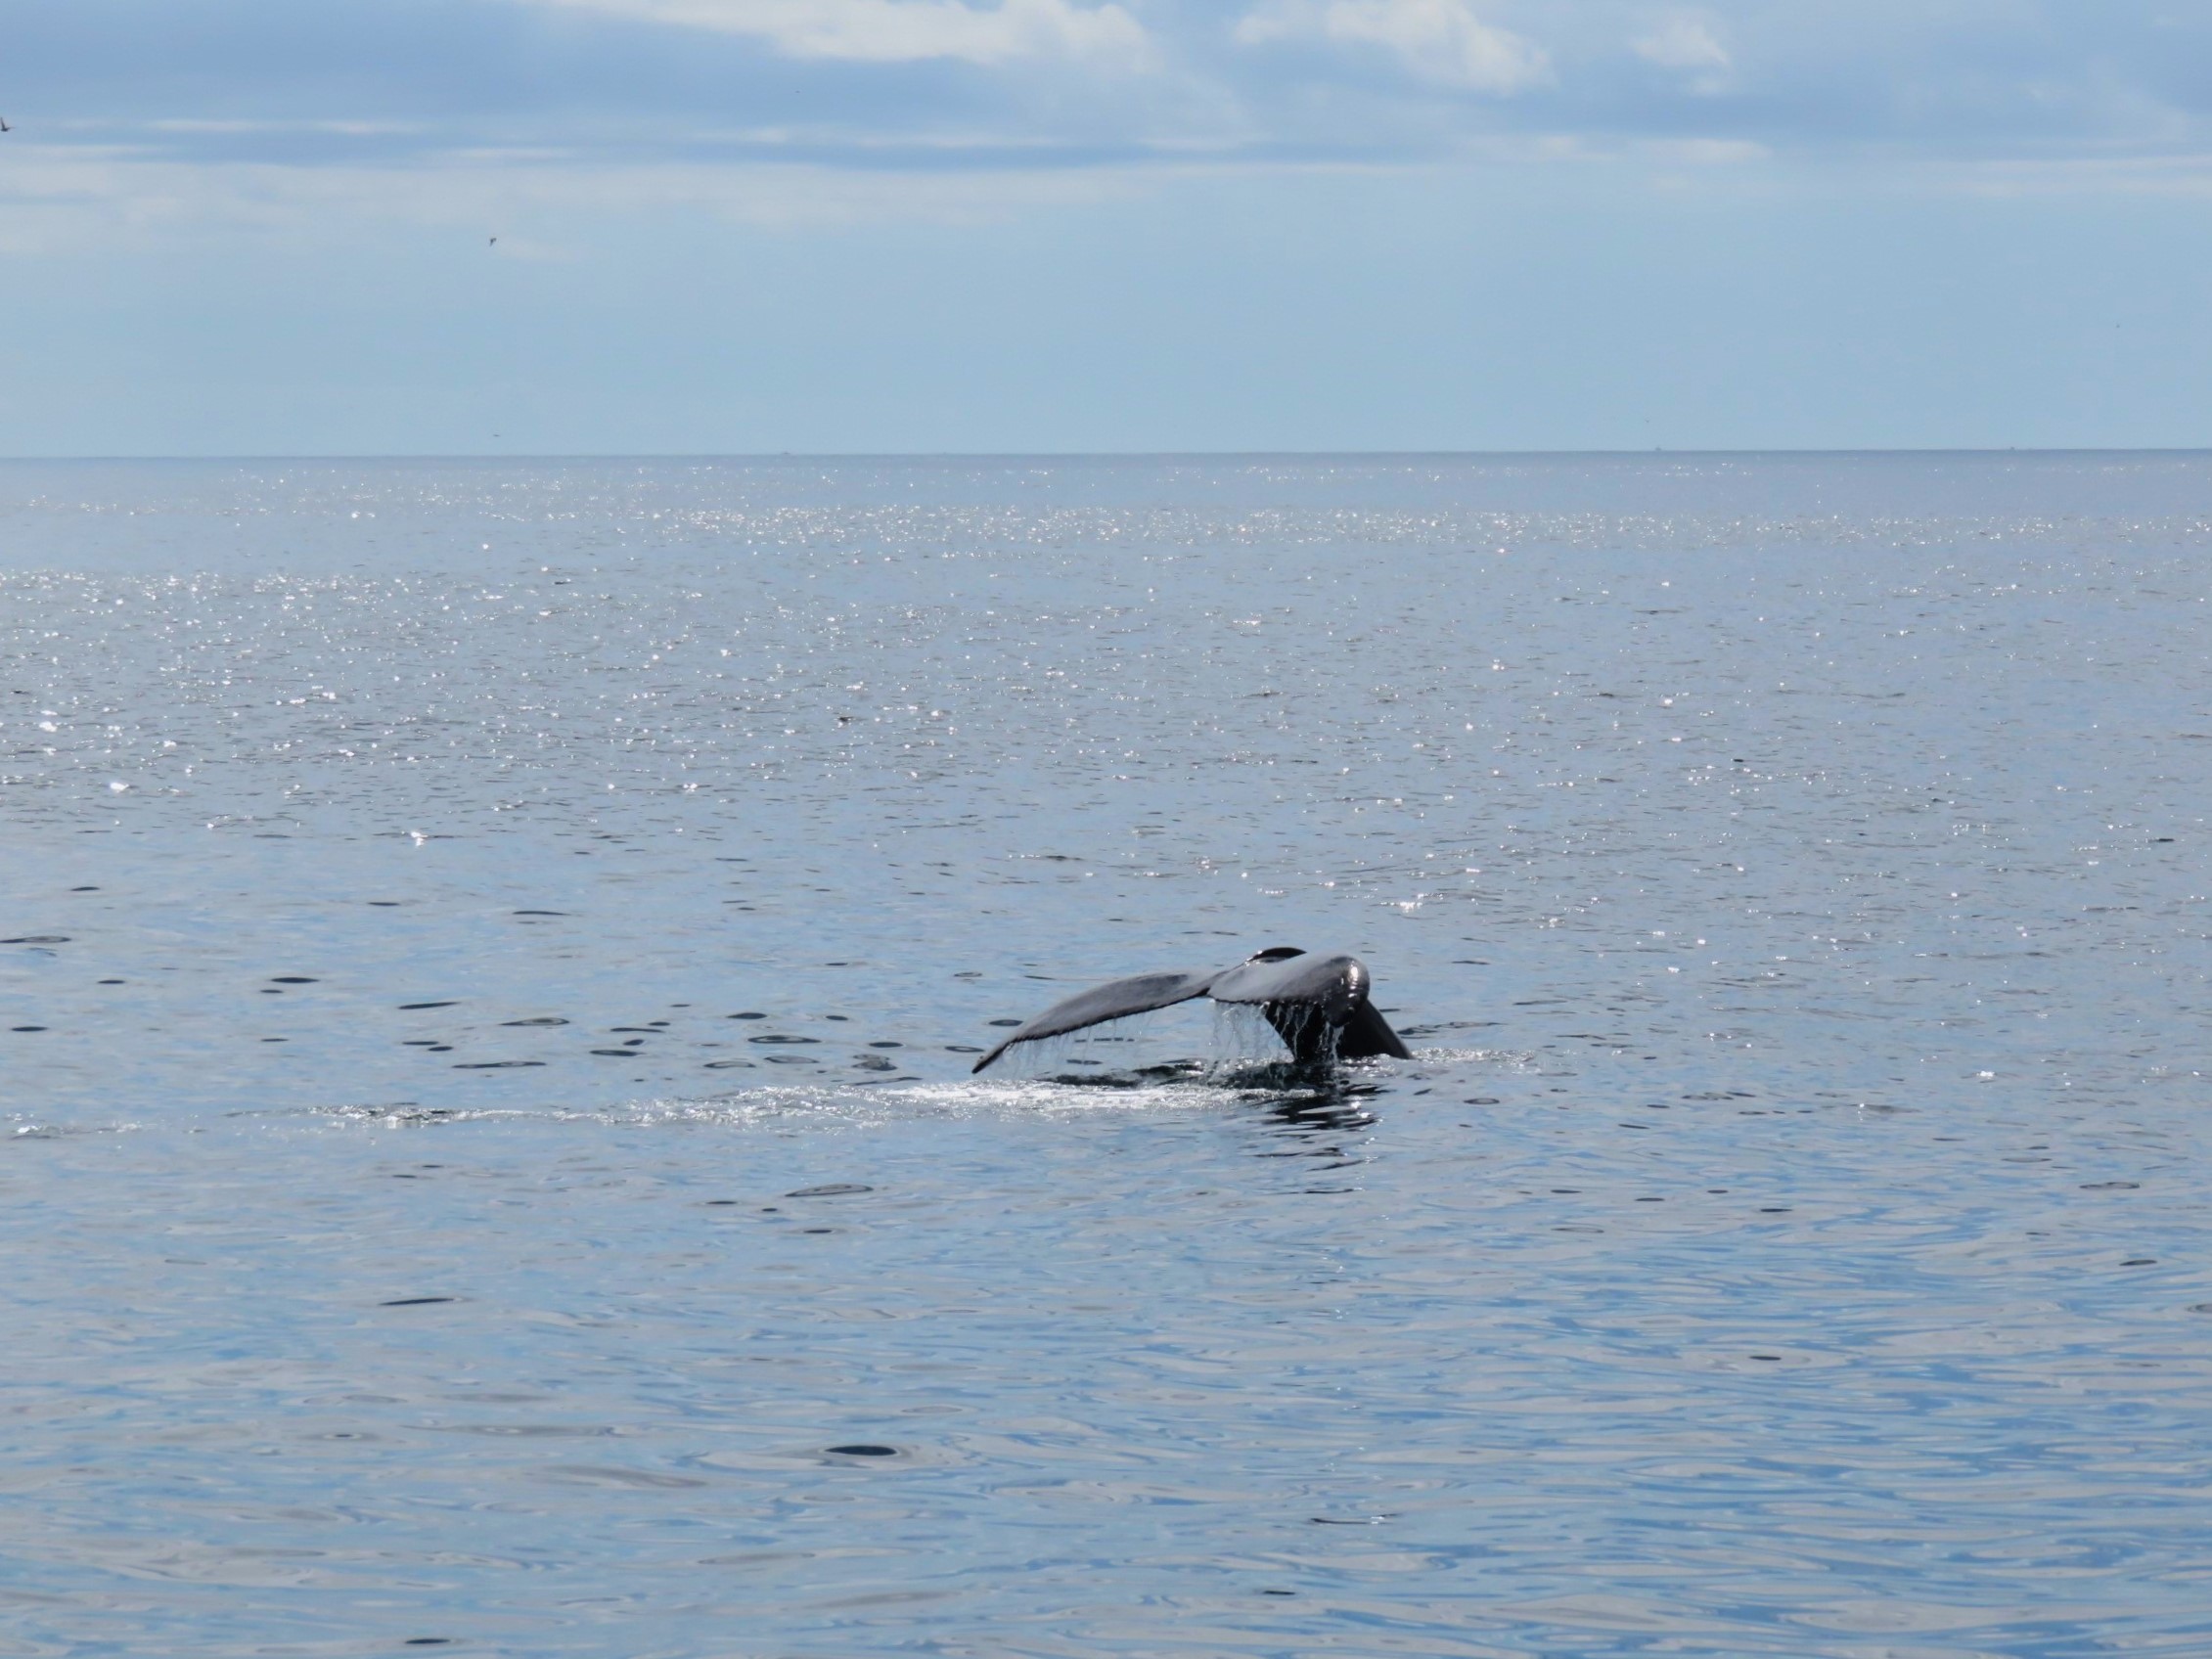 Whale tail emerging from ocean water in Cape Cod Bay. Provincetown whale watch